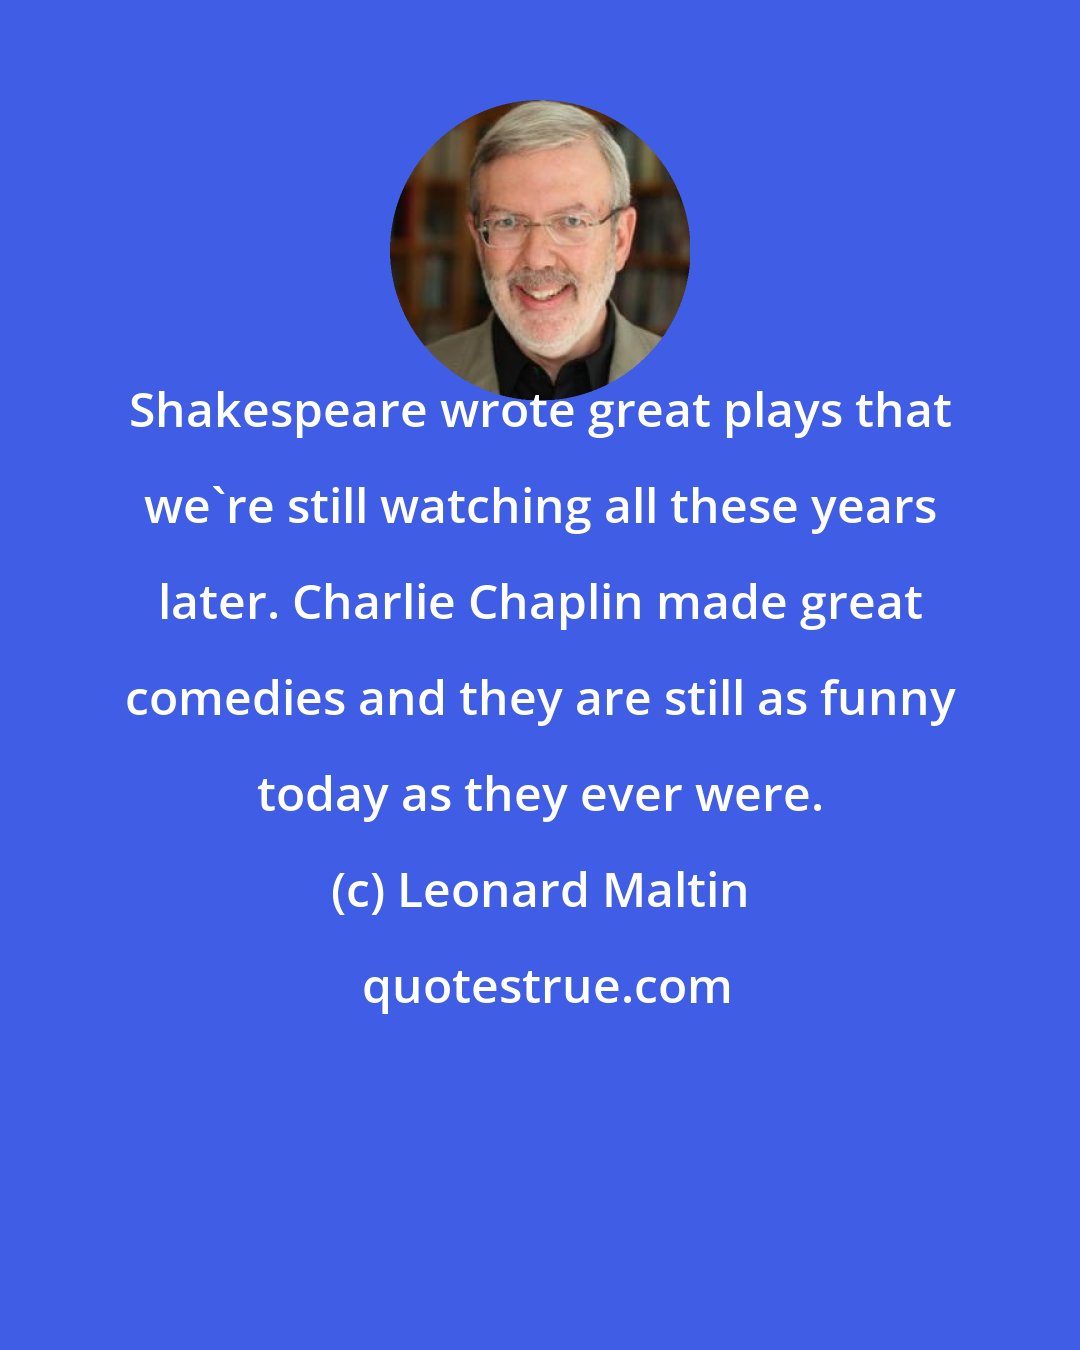 Leonard Maltin: Shakespeare wrote great plays that we're still watching all these years later. Charlie Chaplin made great comedies and they are still as funny today as they ever were.